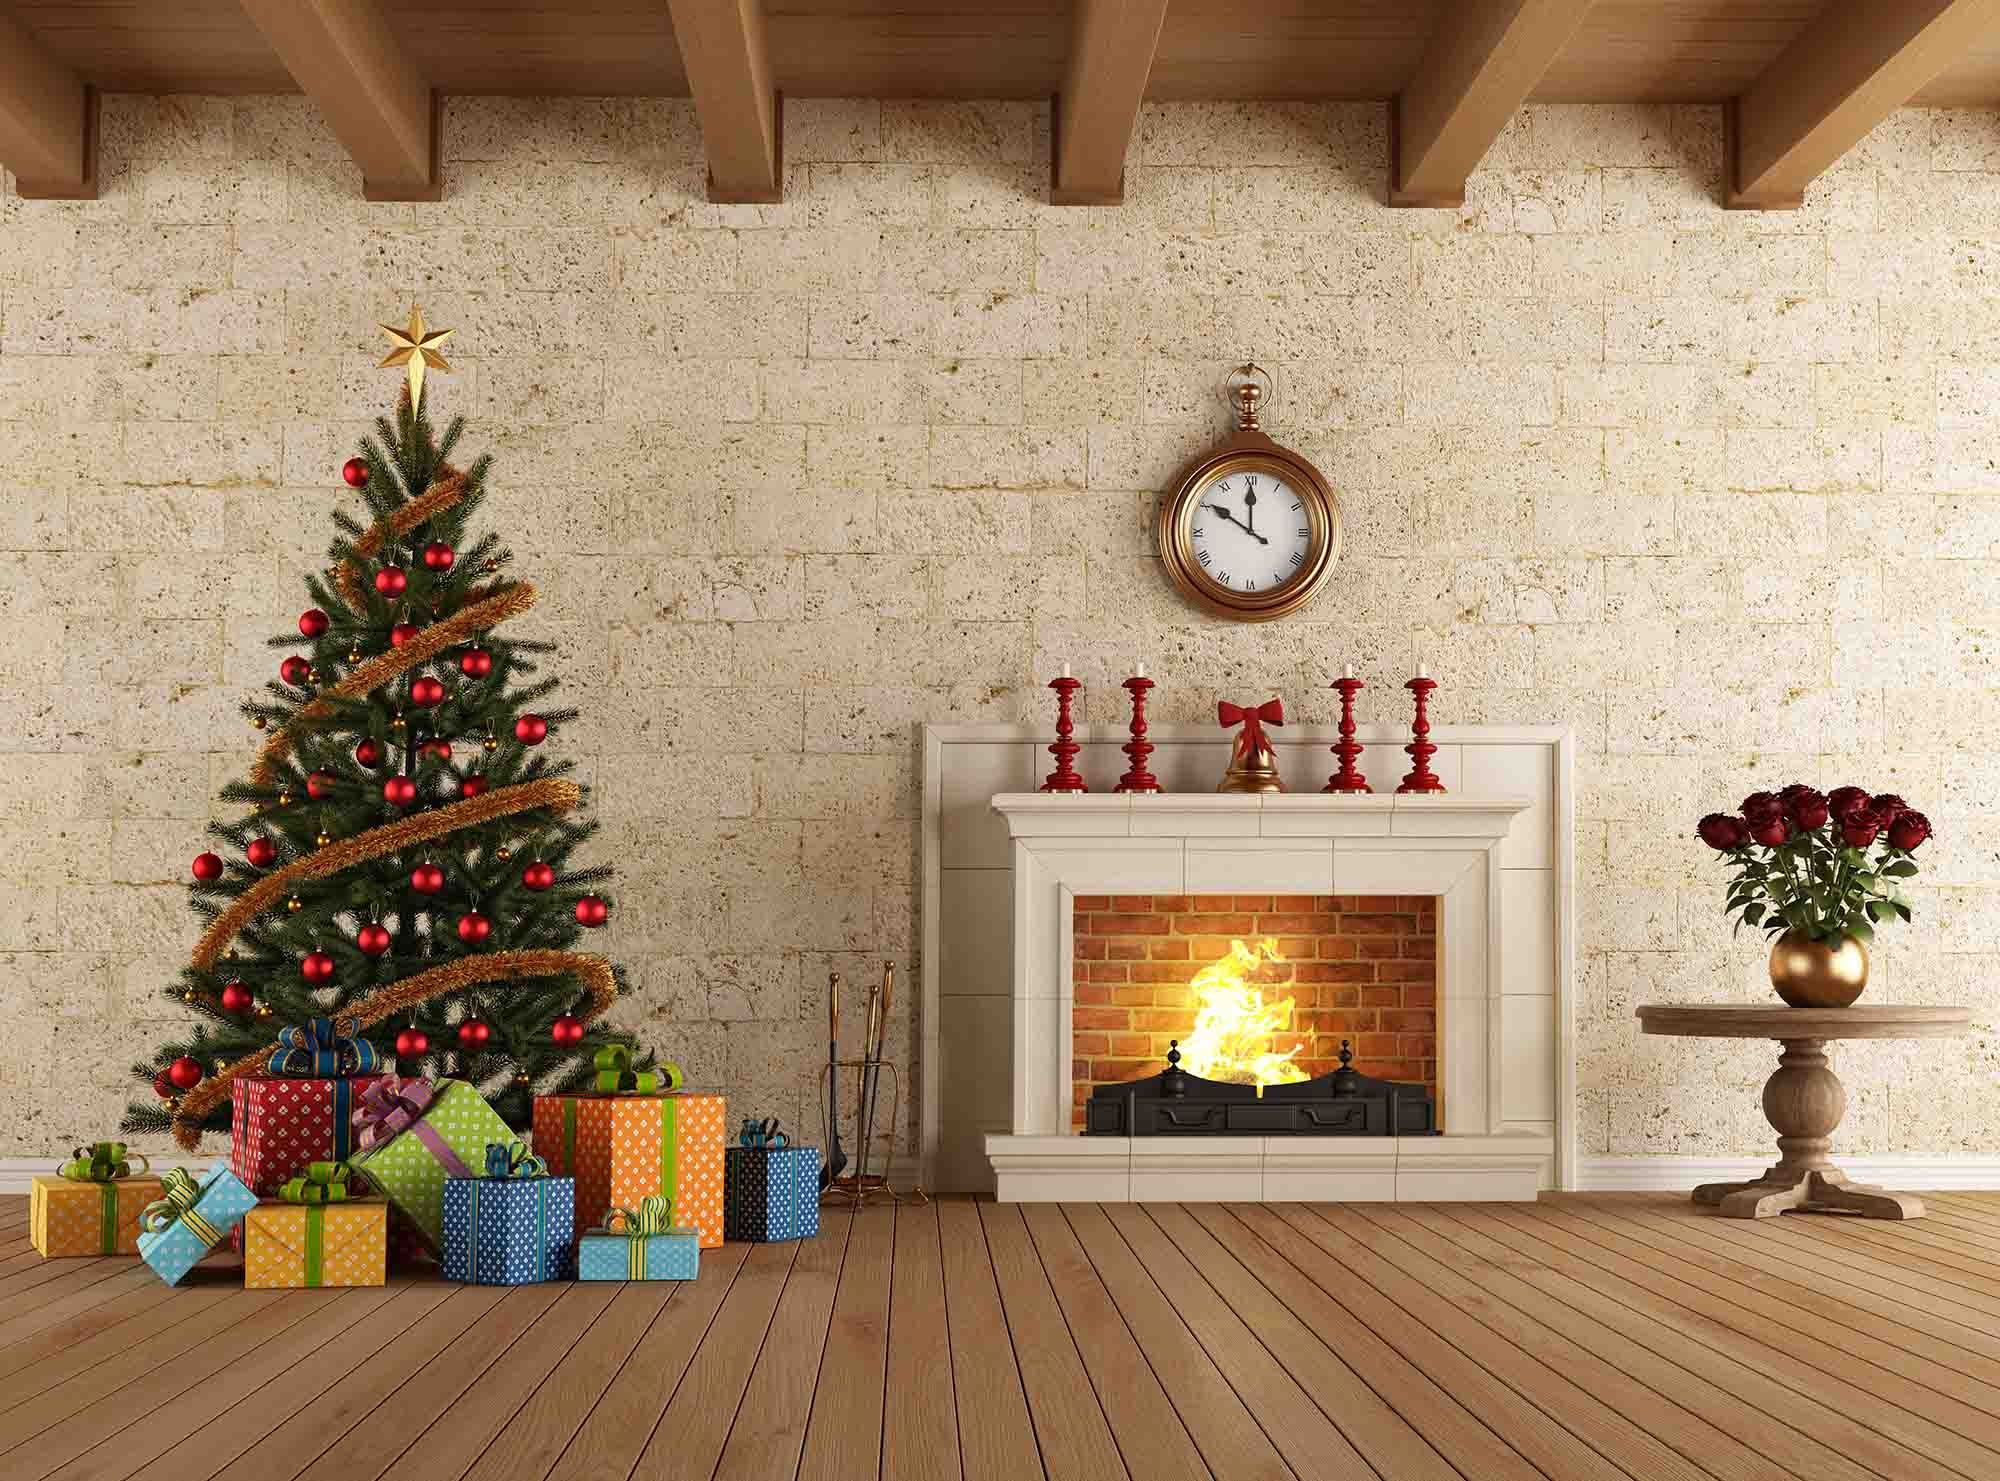 Fireplace Bell And Christmas Tree With Wood Floor Backdrop Shopbackdrop